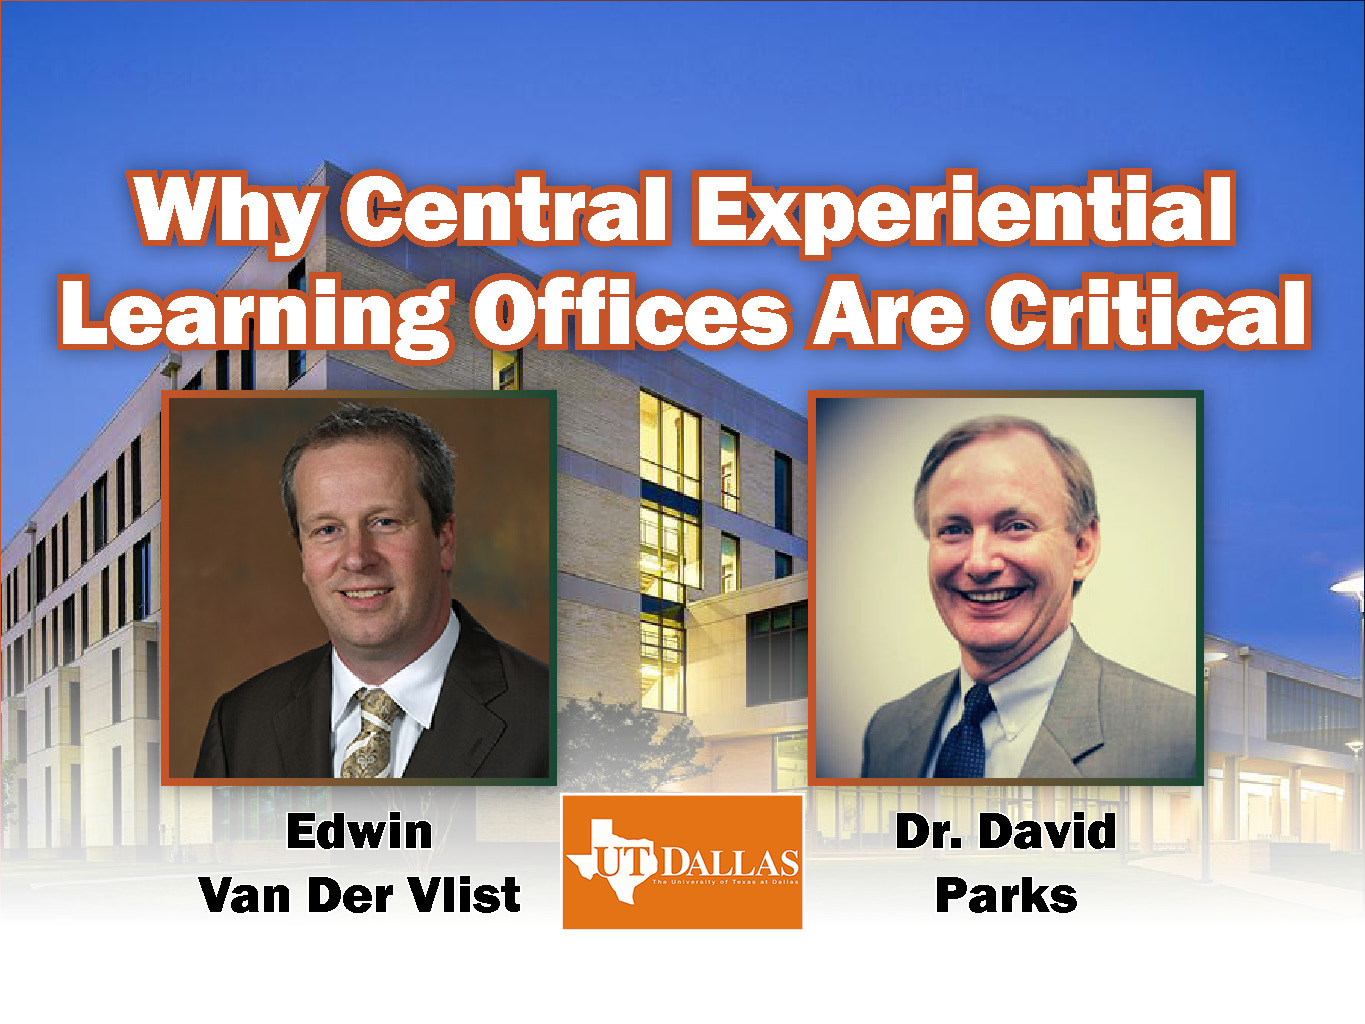 Why Central Experiential Learning Offices are Critical